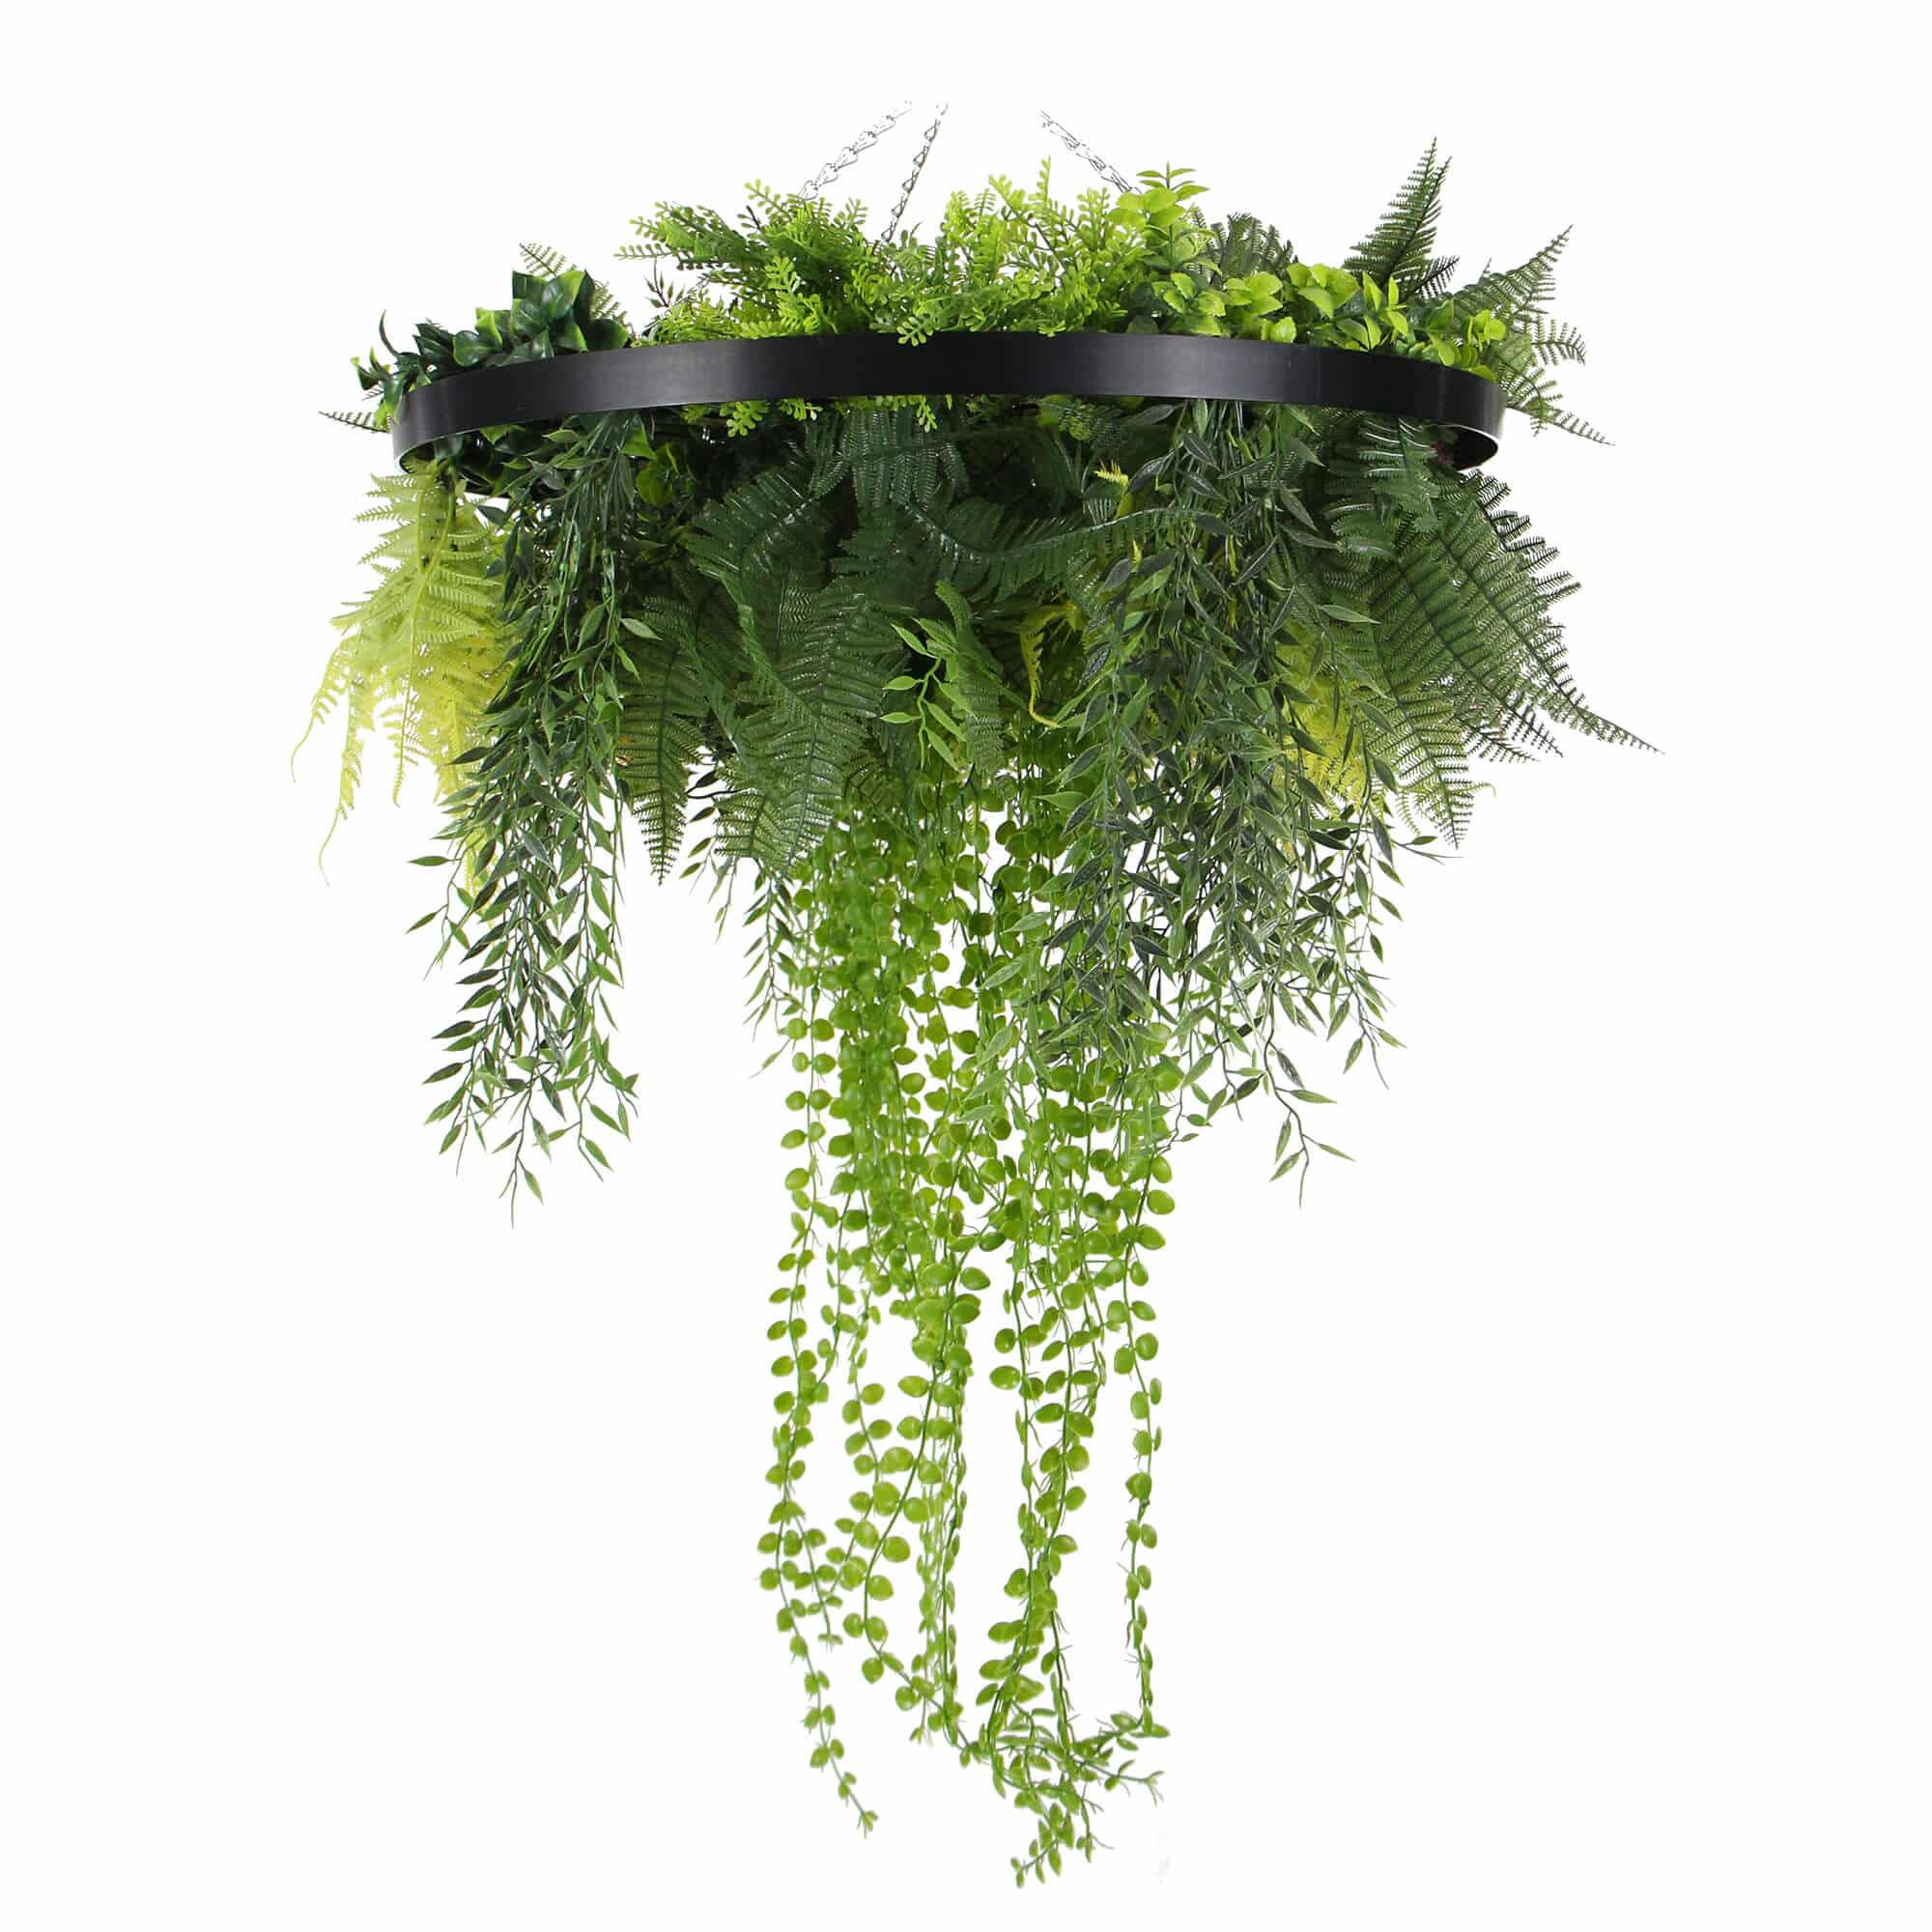 Black Framed Roof Hanging Disc with Draping Pearls Ferns 60cm Diameter Hanging Faux Pearls With Hanging Fake Plants